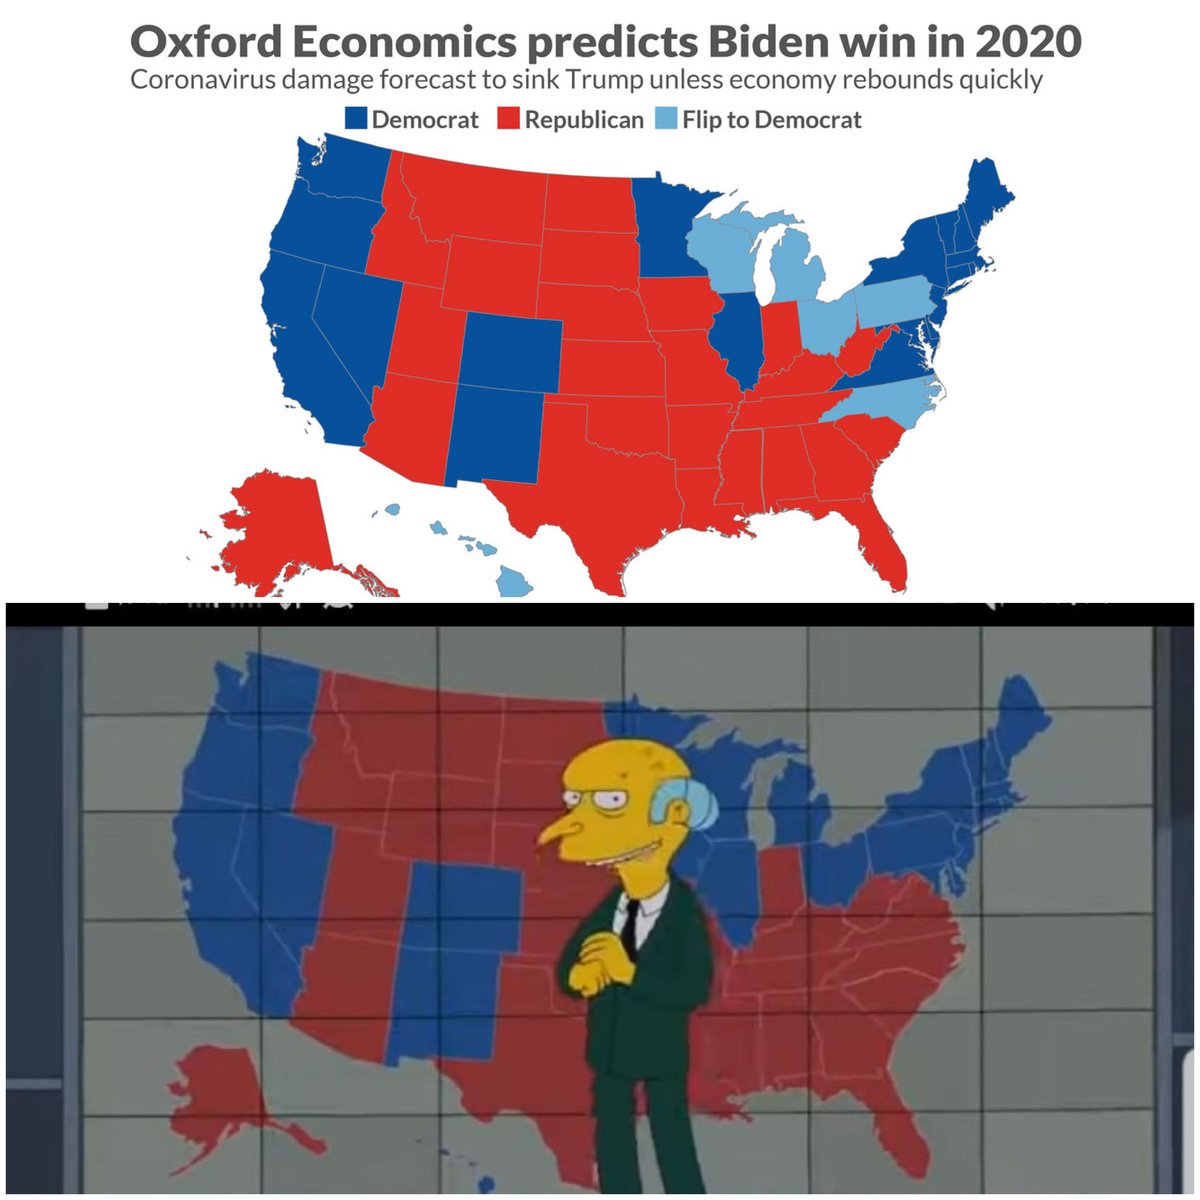 Mohsen This Is Terrible Simpsons Joebidenkamalaharris Joebiden Elections Electionday Electionnight Election Trump Biden T Co Wfkrjrm5qs T Co Dodbr94zyg T Co W0qoxcbdeh